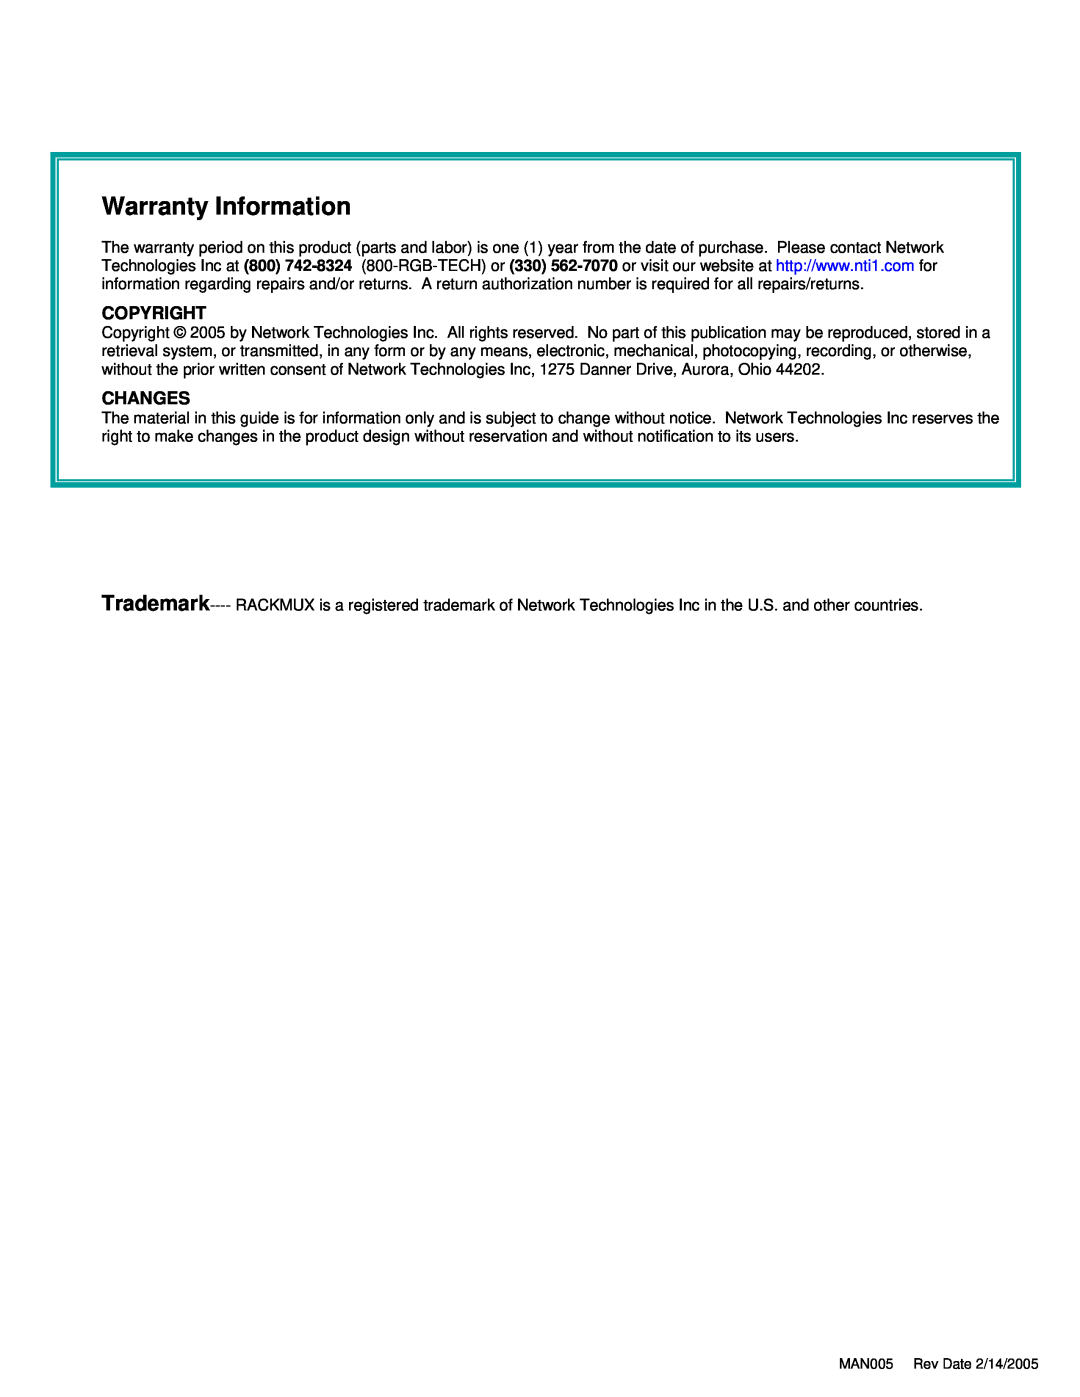 Network Technologies 2907 operation manual Copyright, Changes, Warranty Information 